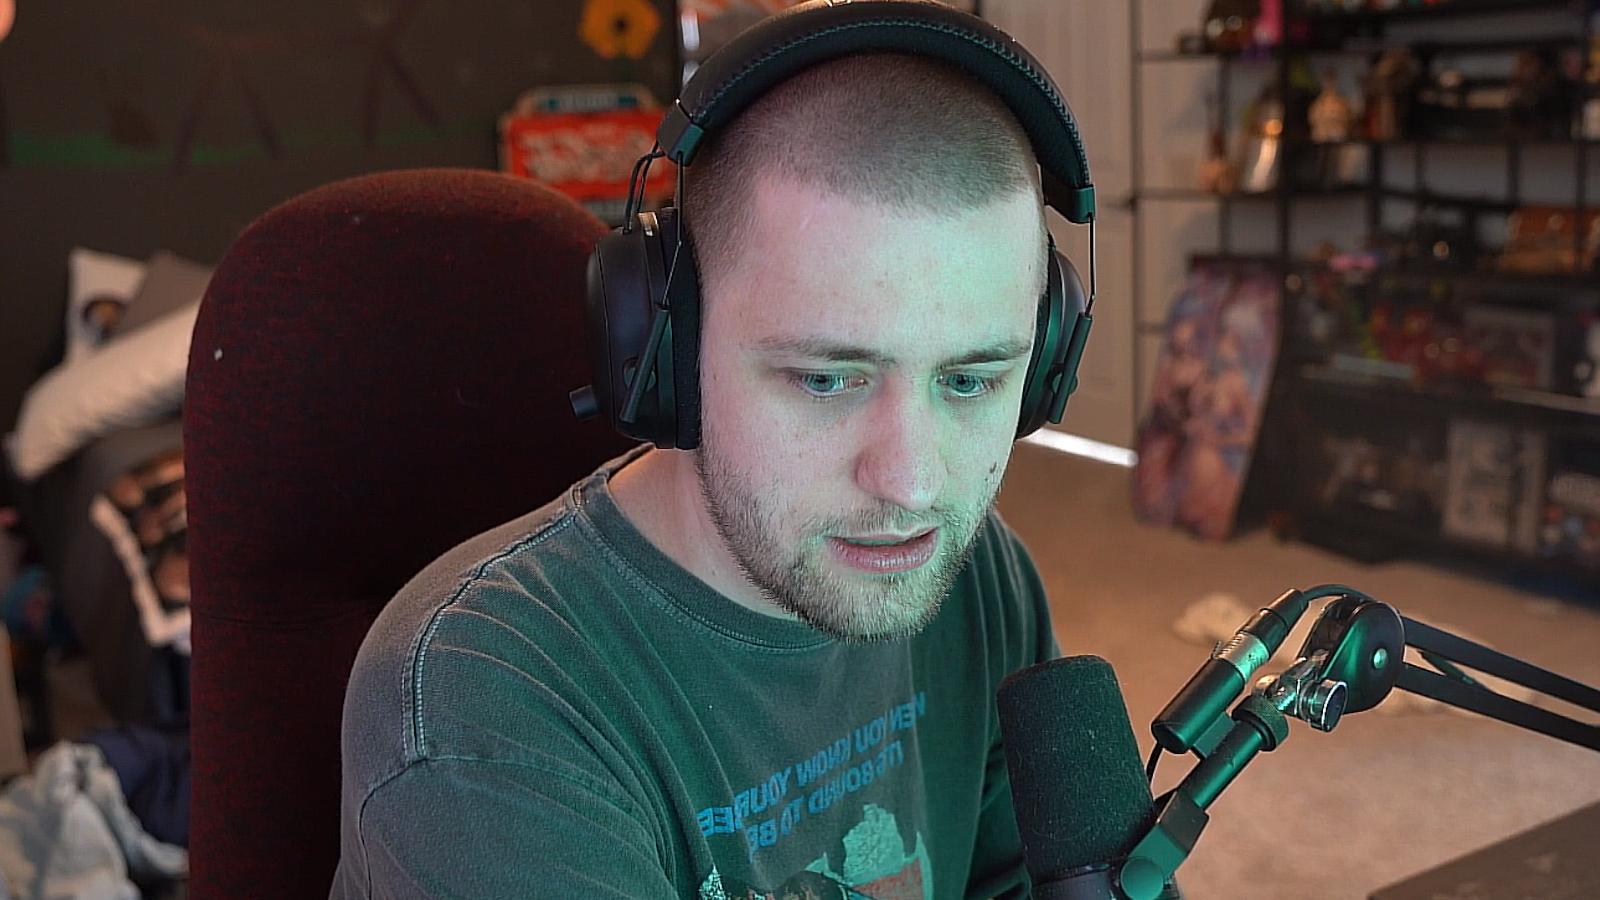 Sodapoppin's new hairstyle after his recent trip to France